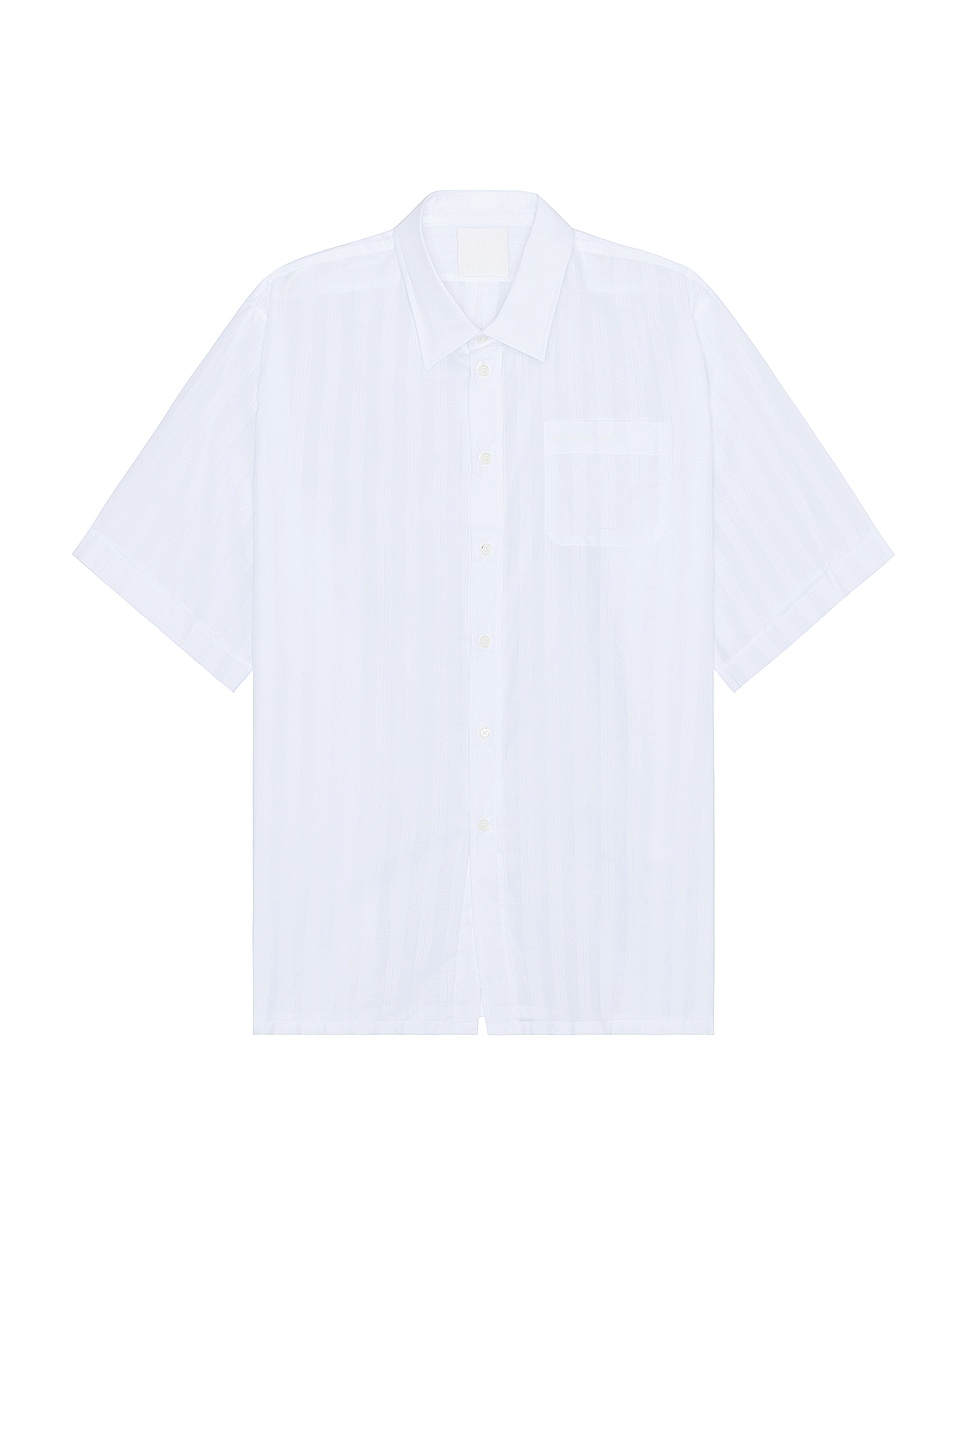 Image 1 of Givenchy Short Sleeve Shirt With Pocket in White